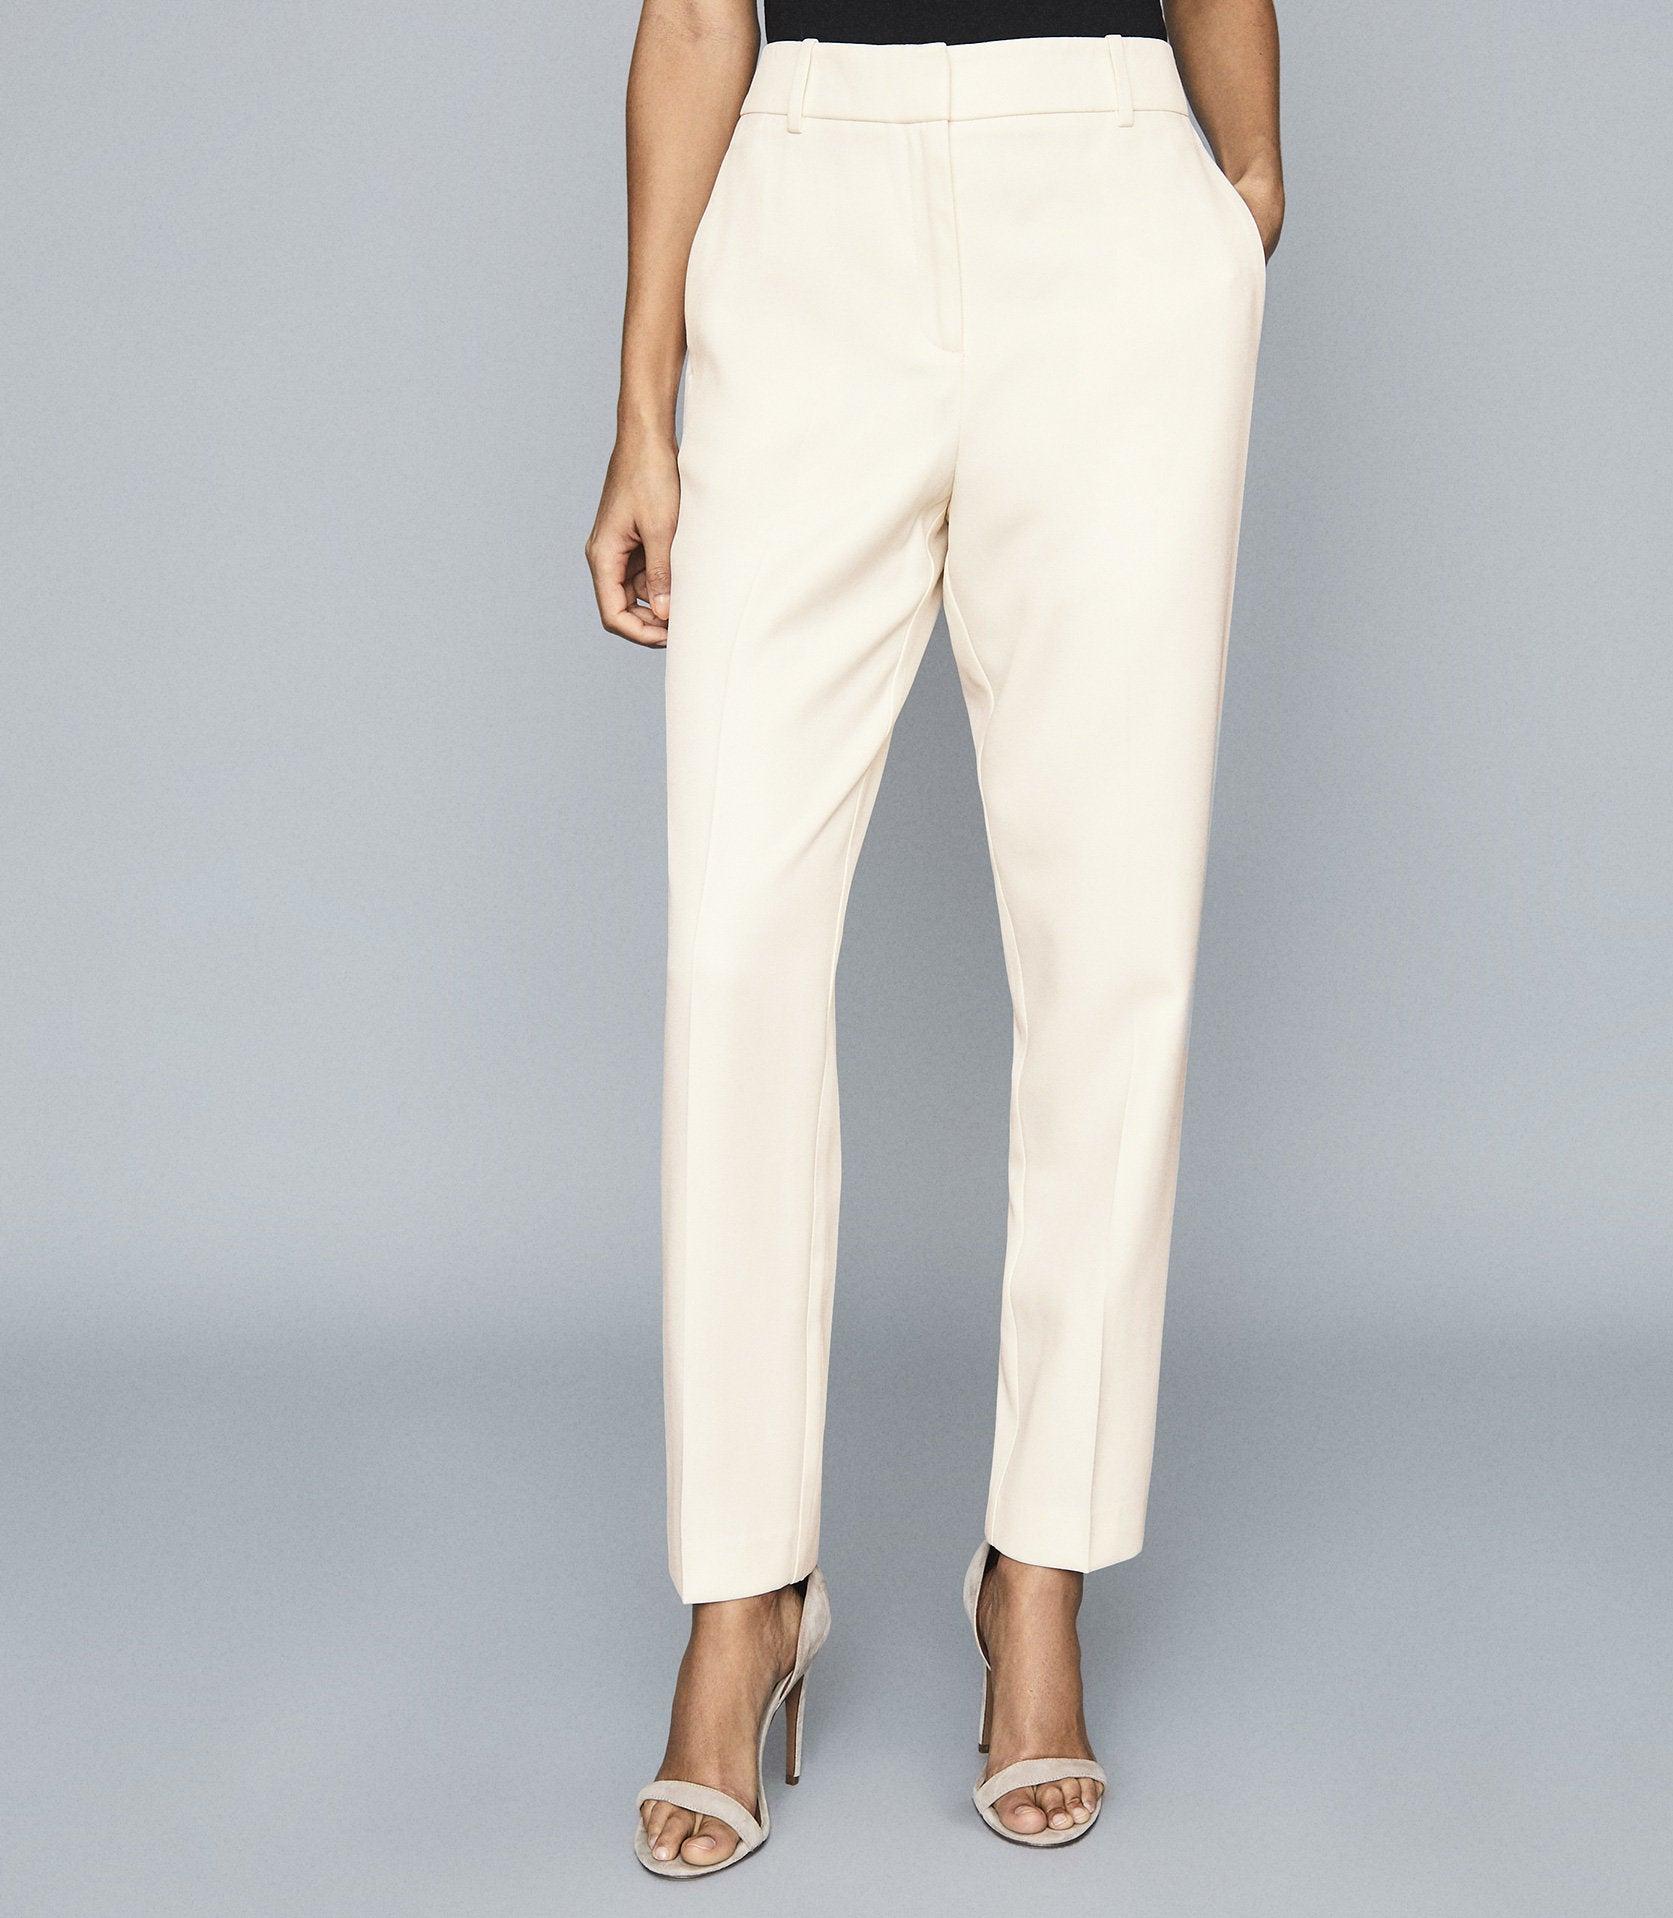 Reiss Synthetic Edie - Tailored Slim-leg Trousers in Ivory (White) - Lyst